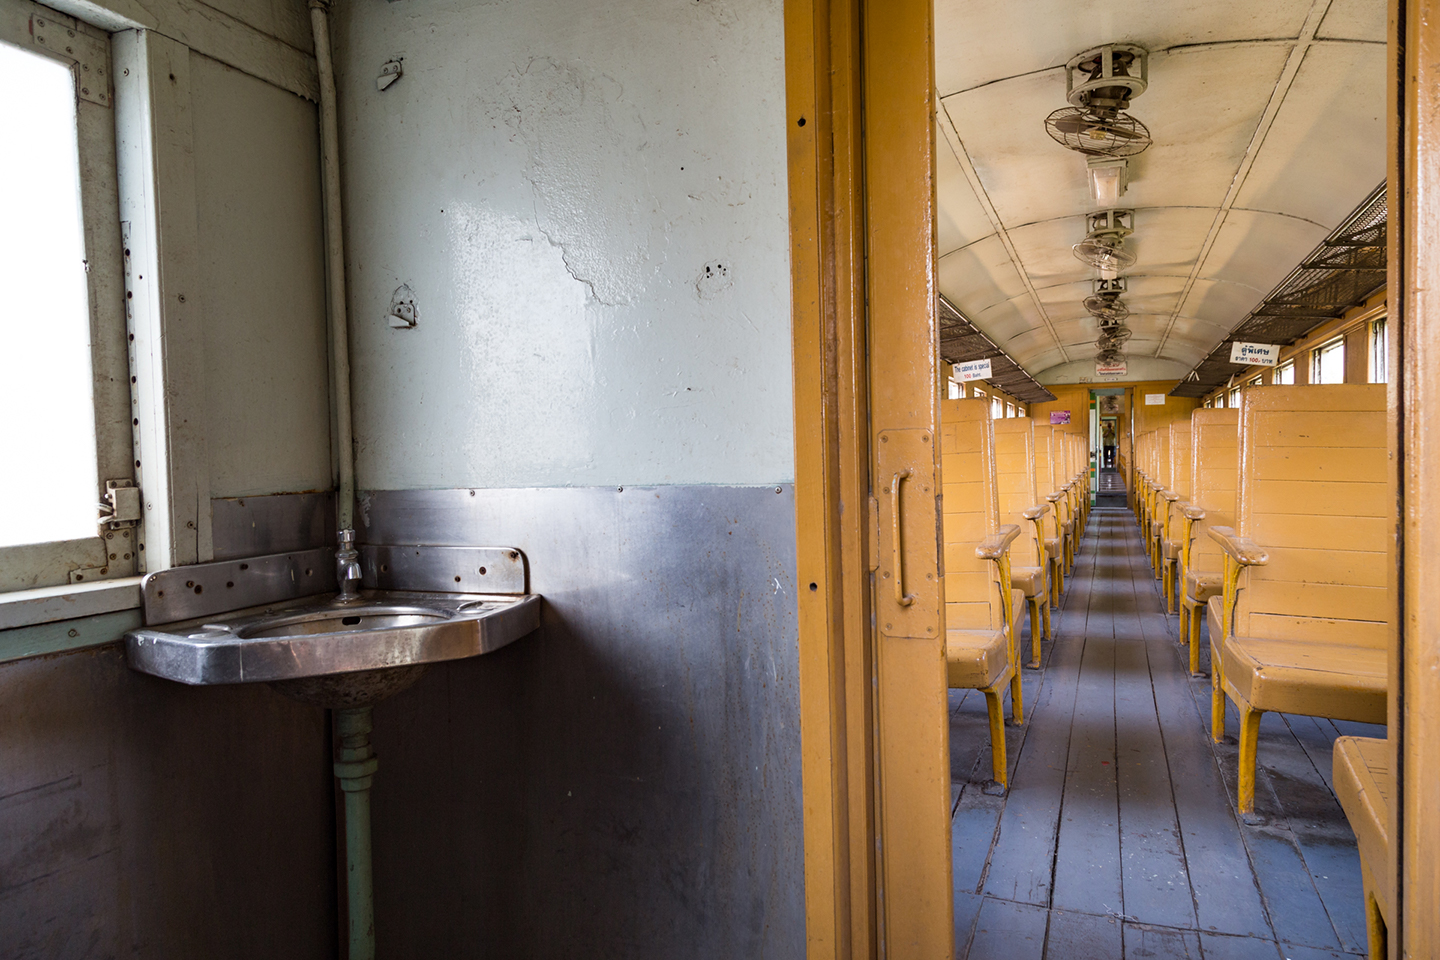 Though sober, spartan even, and very reminiscent of WWII, the austere interior of the III class train looked authentic, clean and was anything but uncomfortable. The 2-hour scenic route to Tham Krasae Railway Station was indeed a rare delight.